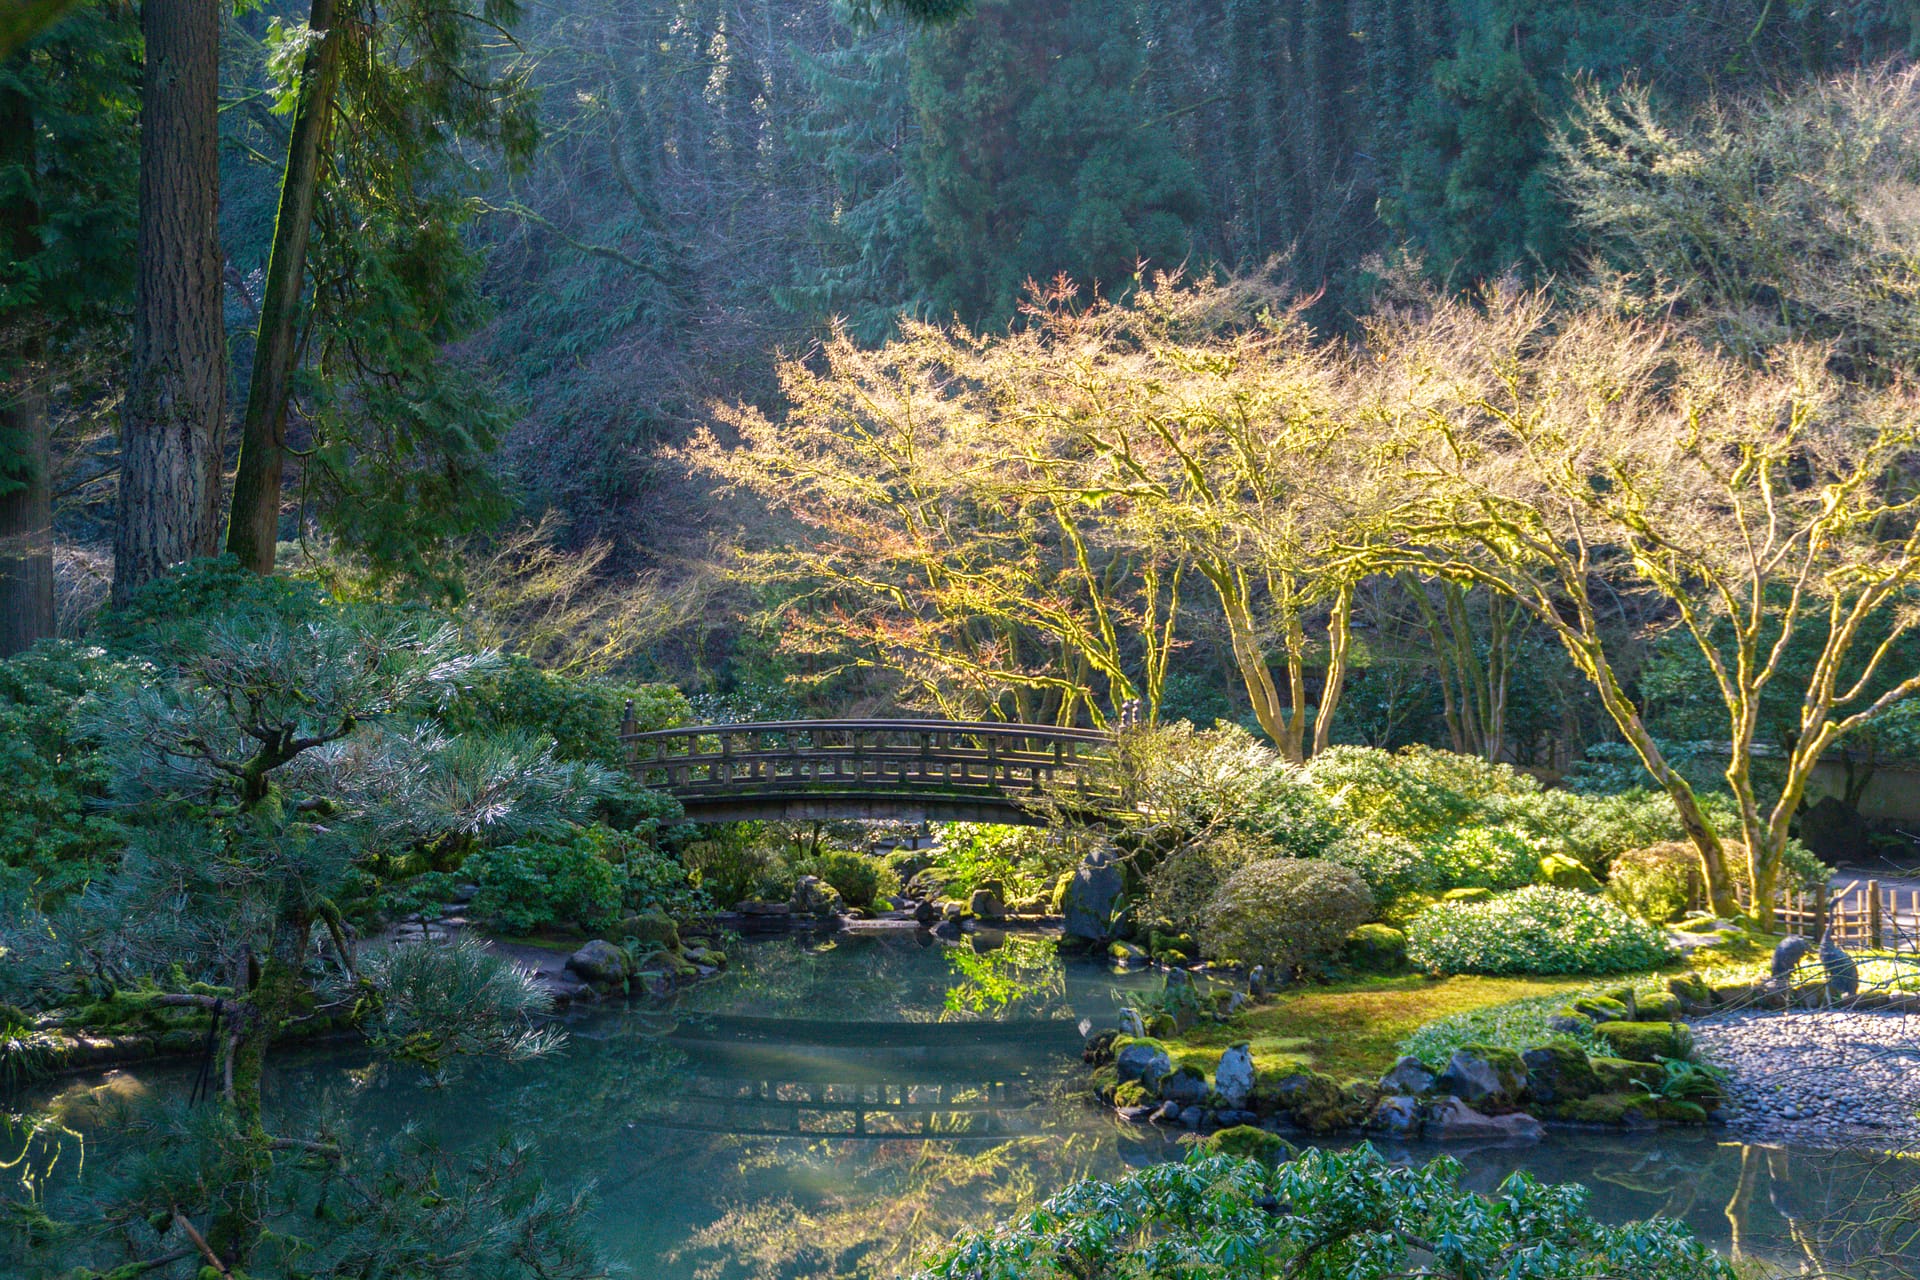 The strolling pond garden in Portland Japanese Garden. From this perspective we see a wooden bridge (The Moon Bridge) and trees illuminated by sunshine.